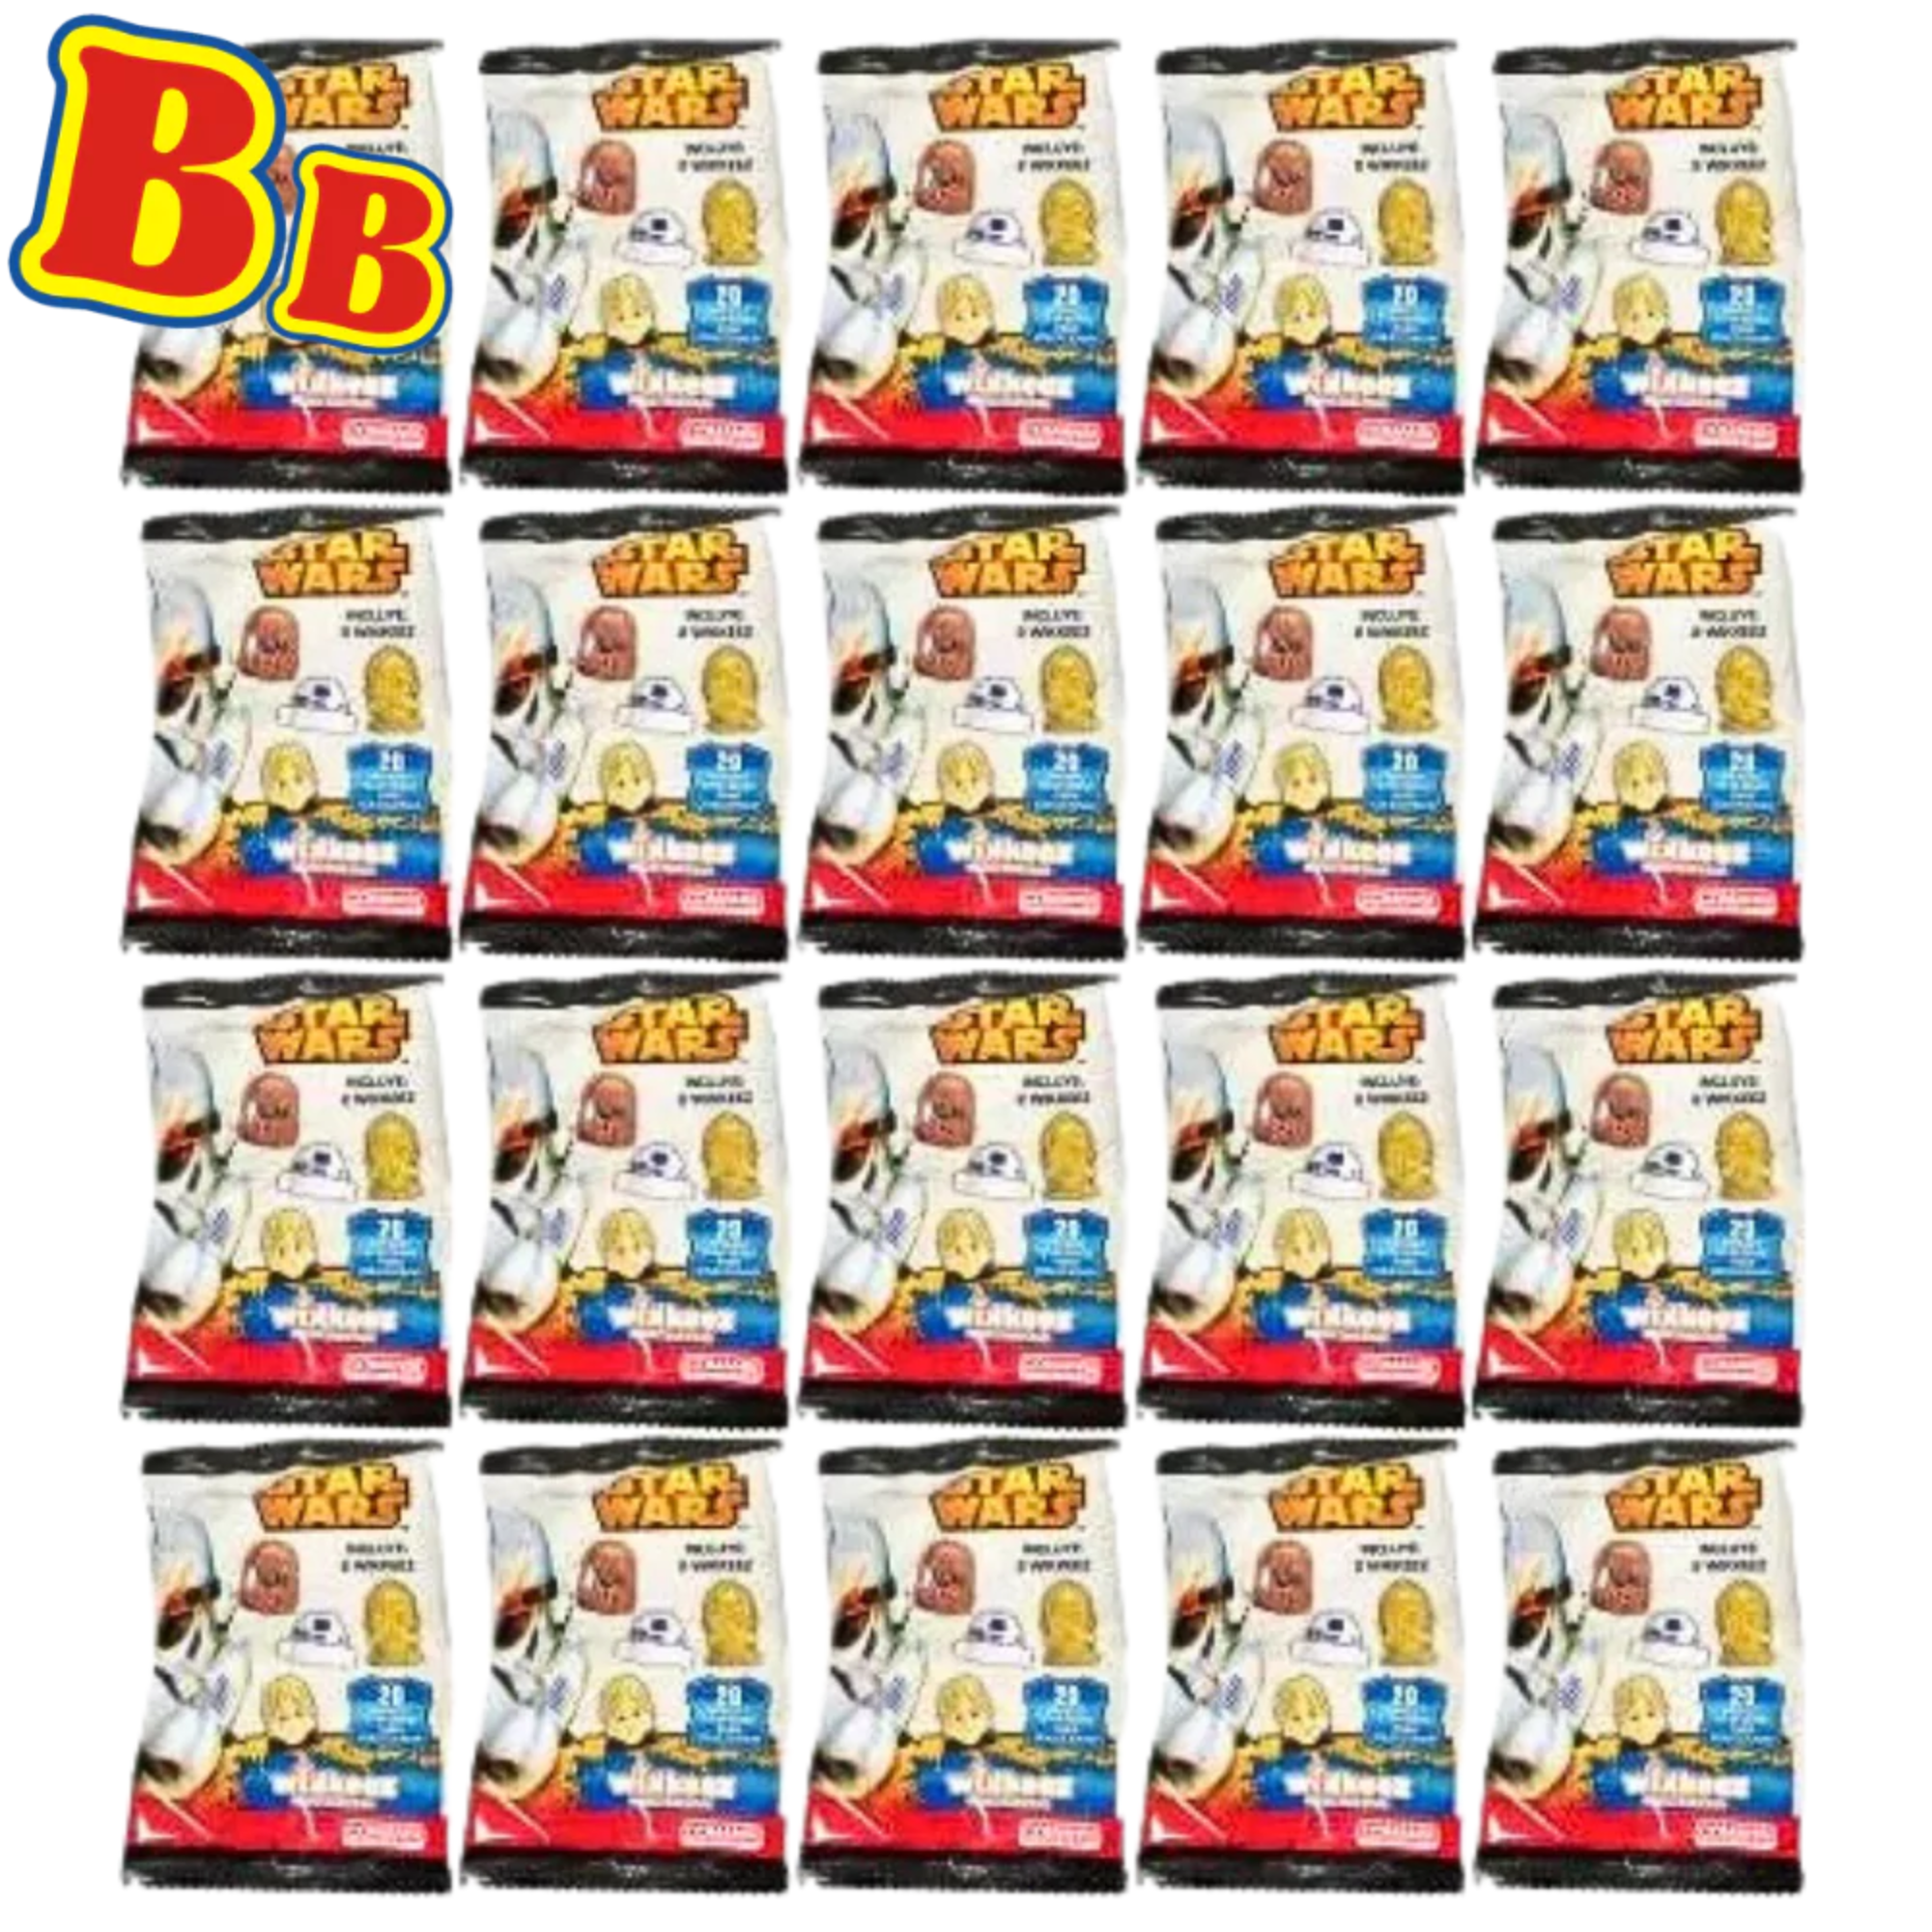 Star Wars Wikkeez Twin Pack Figure Head Party Blind Bags - 20 Packs Supplied - Toptoys2u